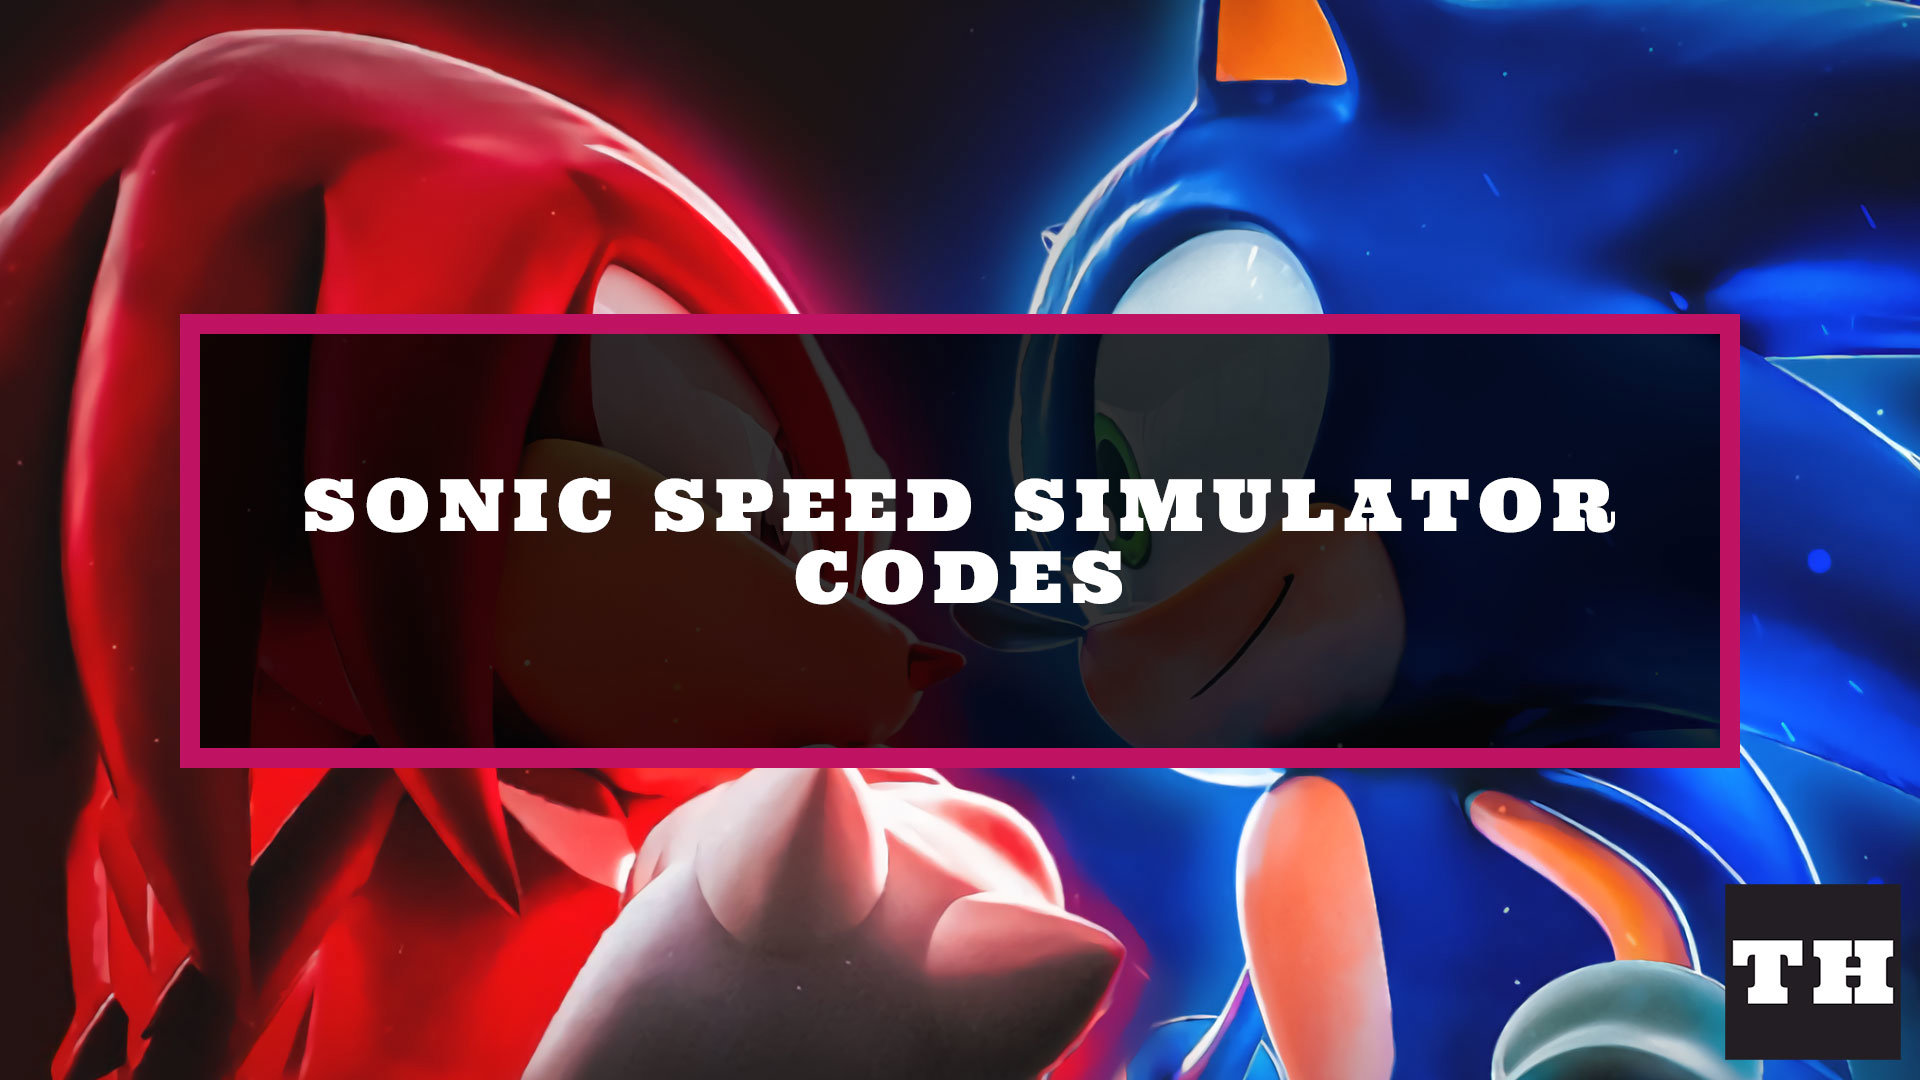 all-new-secret-sailor-tails-codes-in-sonic-speed-simulator-codes-sonic-speed-simulator-codes